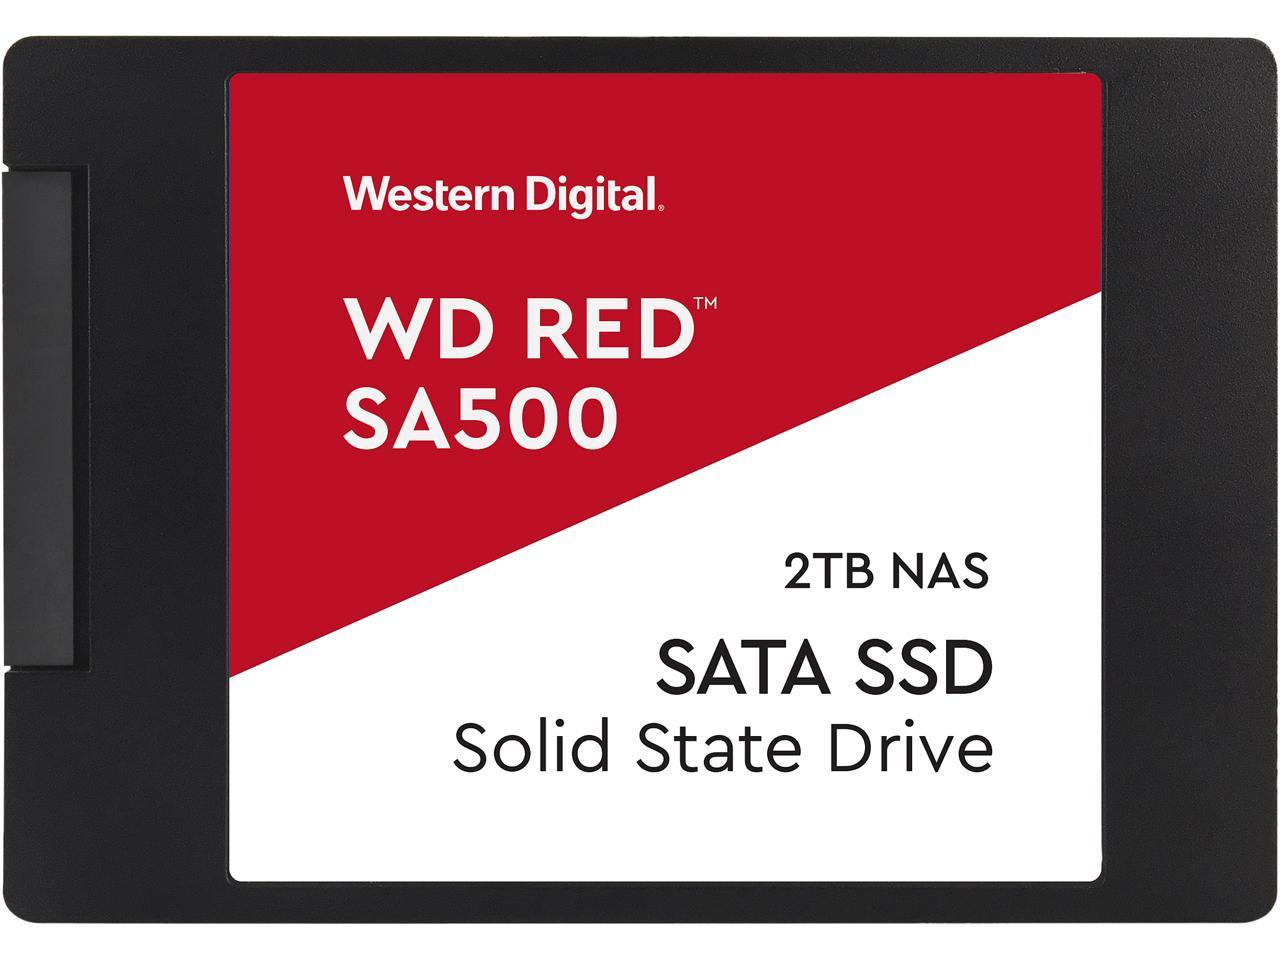 WD 2TB WD Red SA500 NAS 3D NAND Internal SSD - SATA III 6 Gb/s, 2.5"/7mm, Up to 560 MB/s